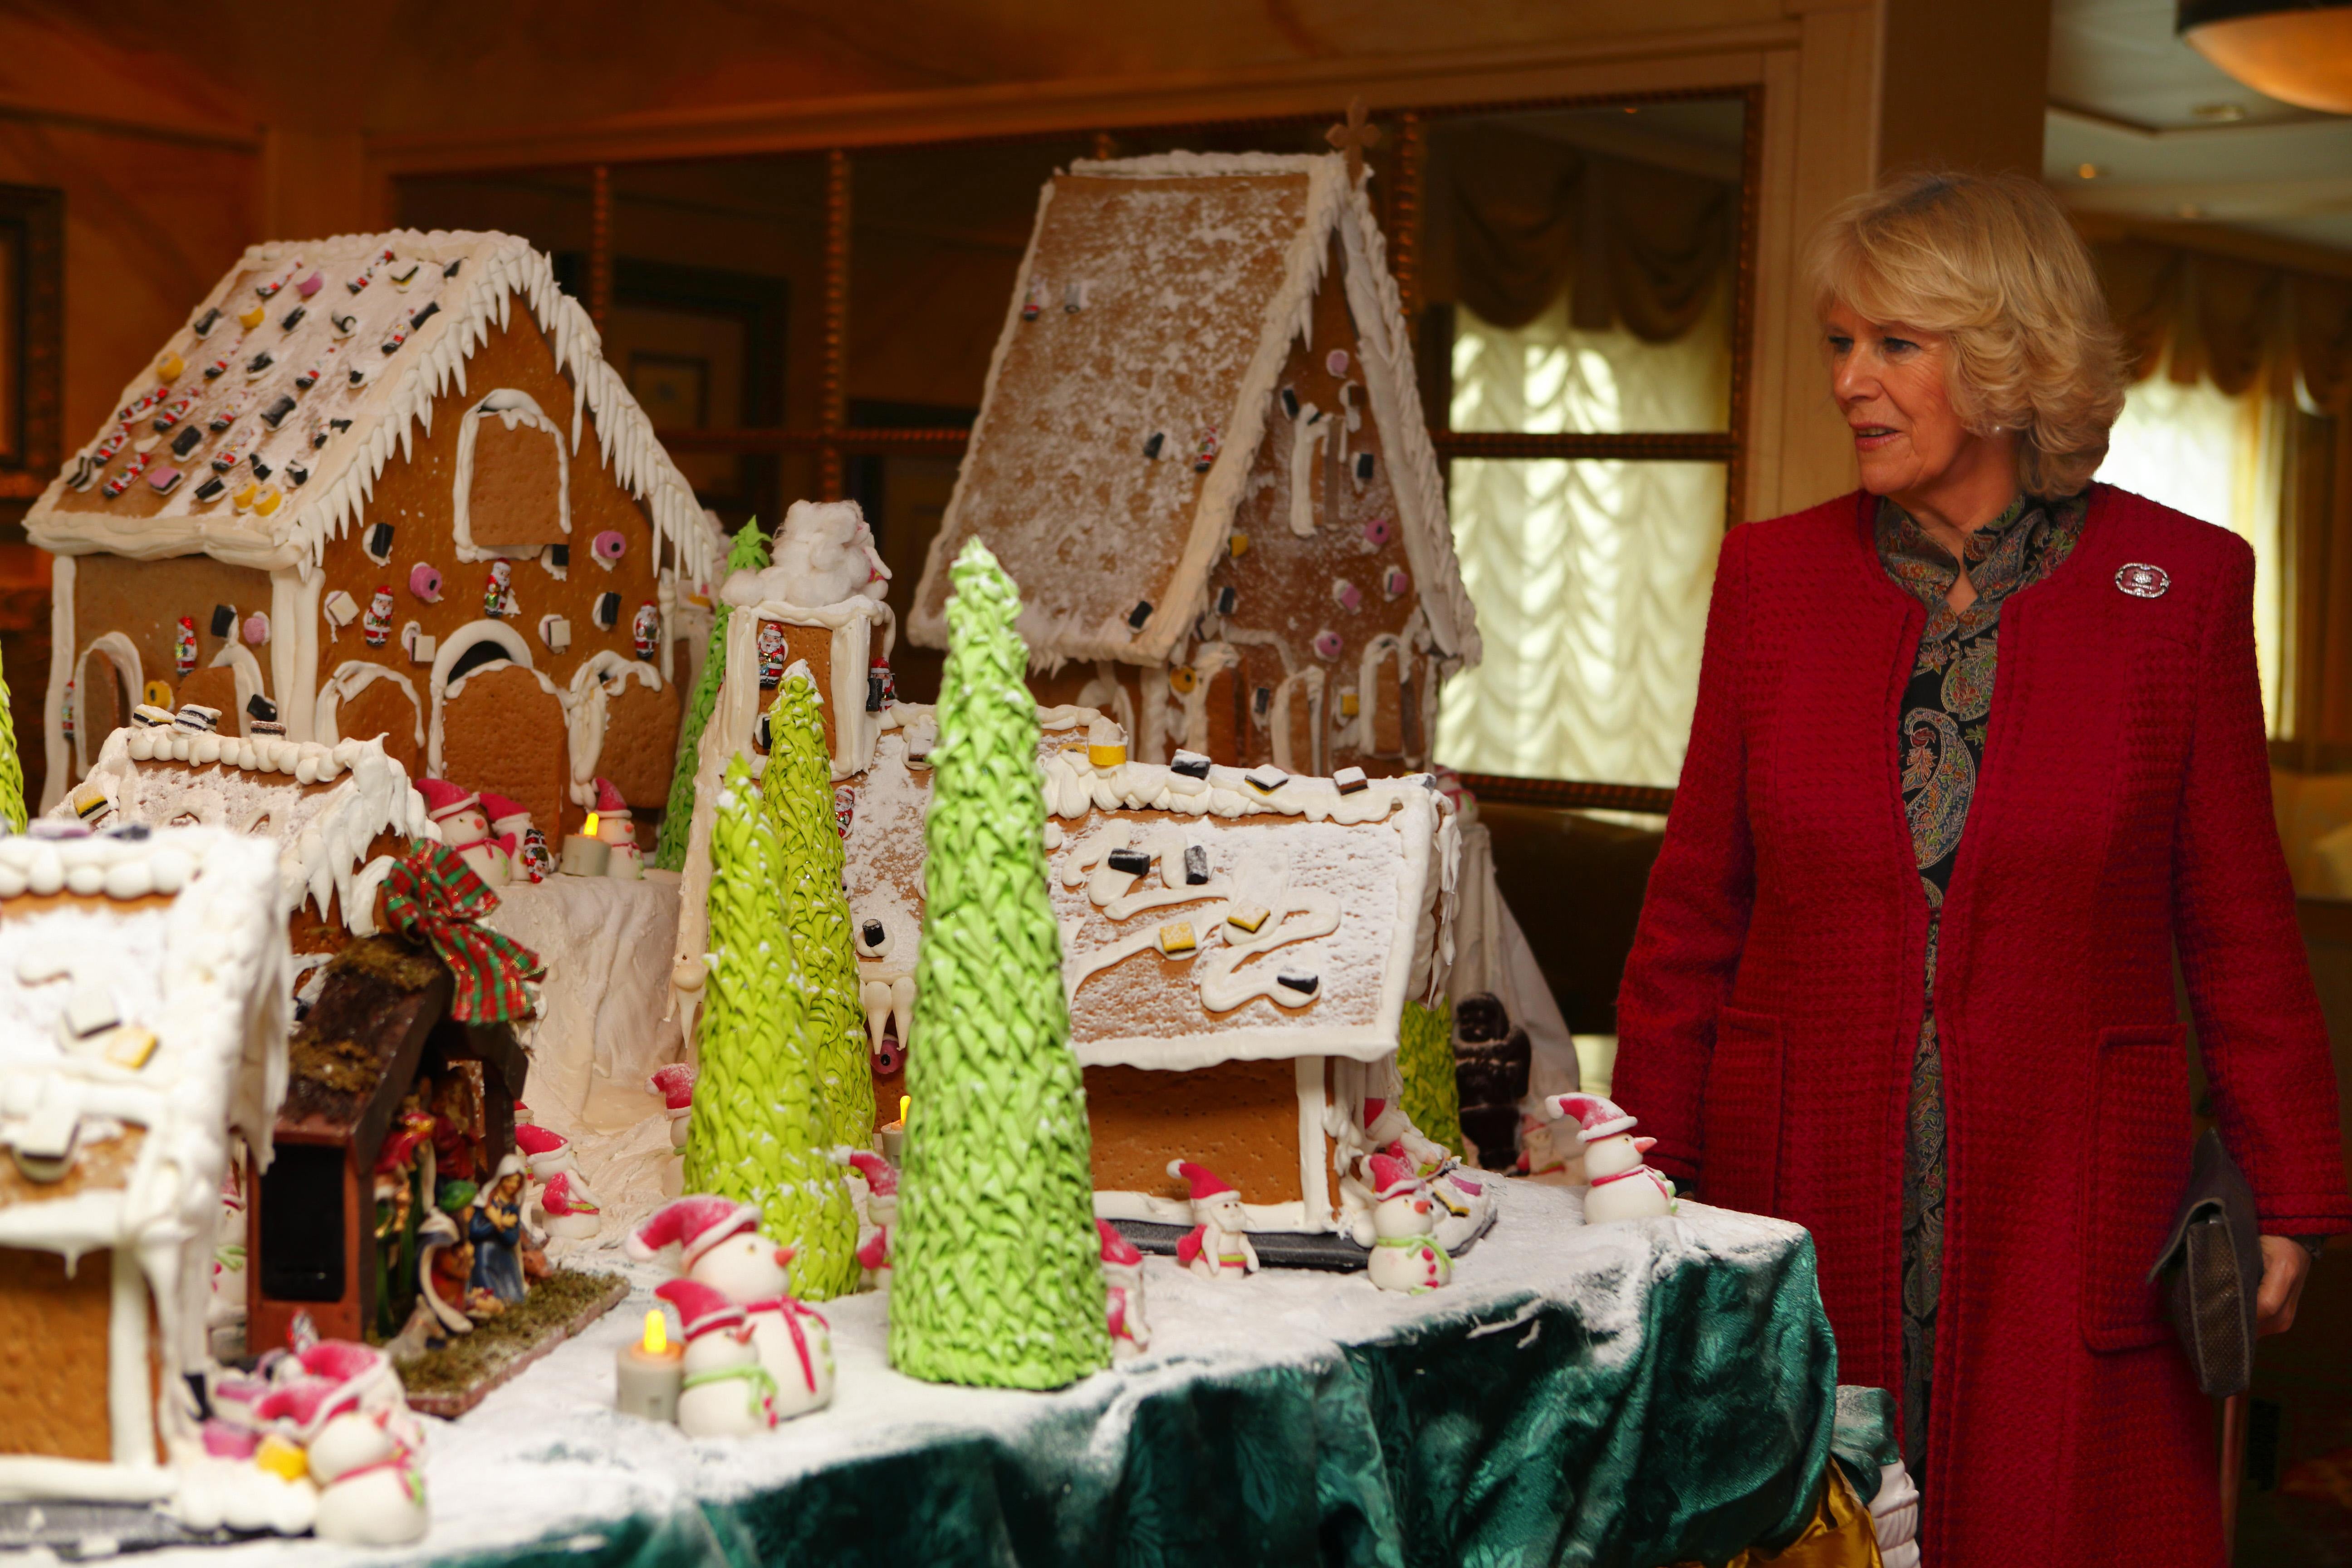 The Duchess of Cornwall views a gingerbread model village (Chris Ison/PA)